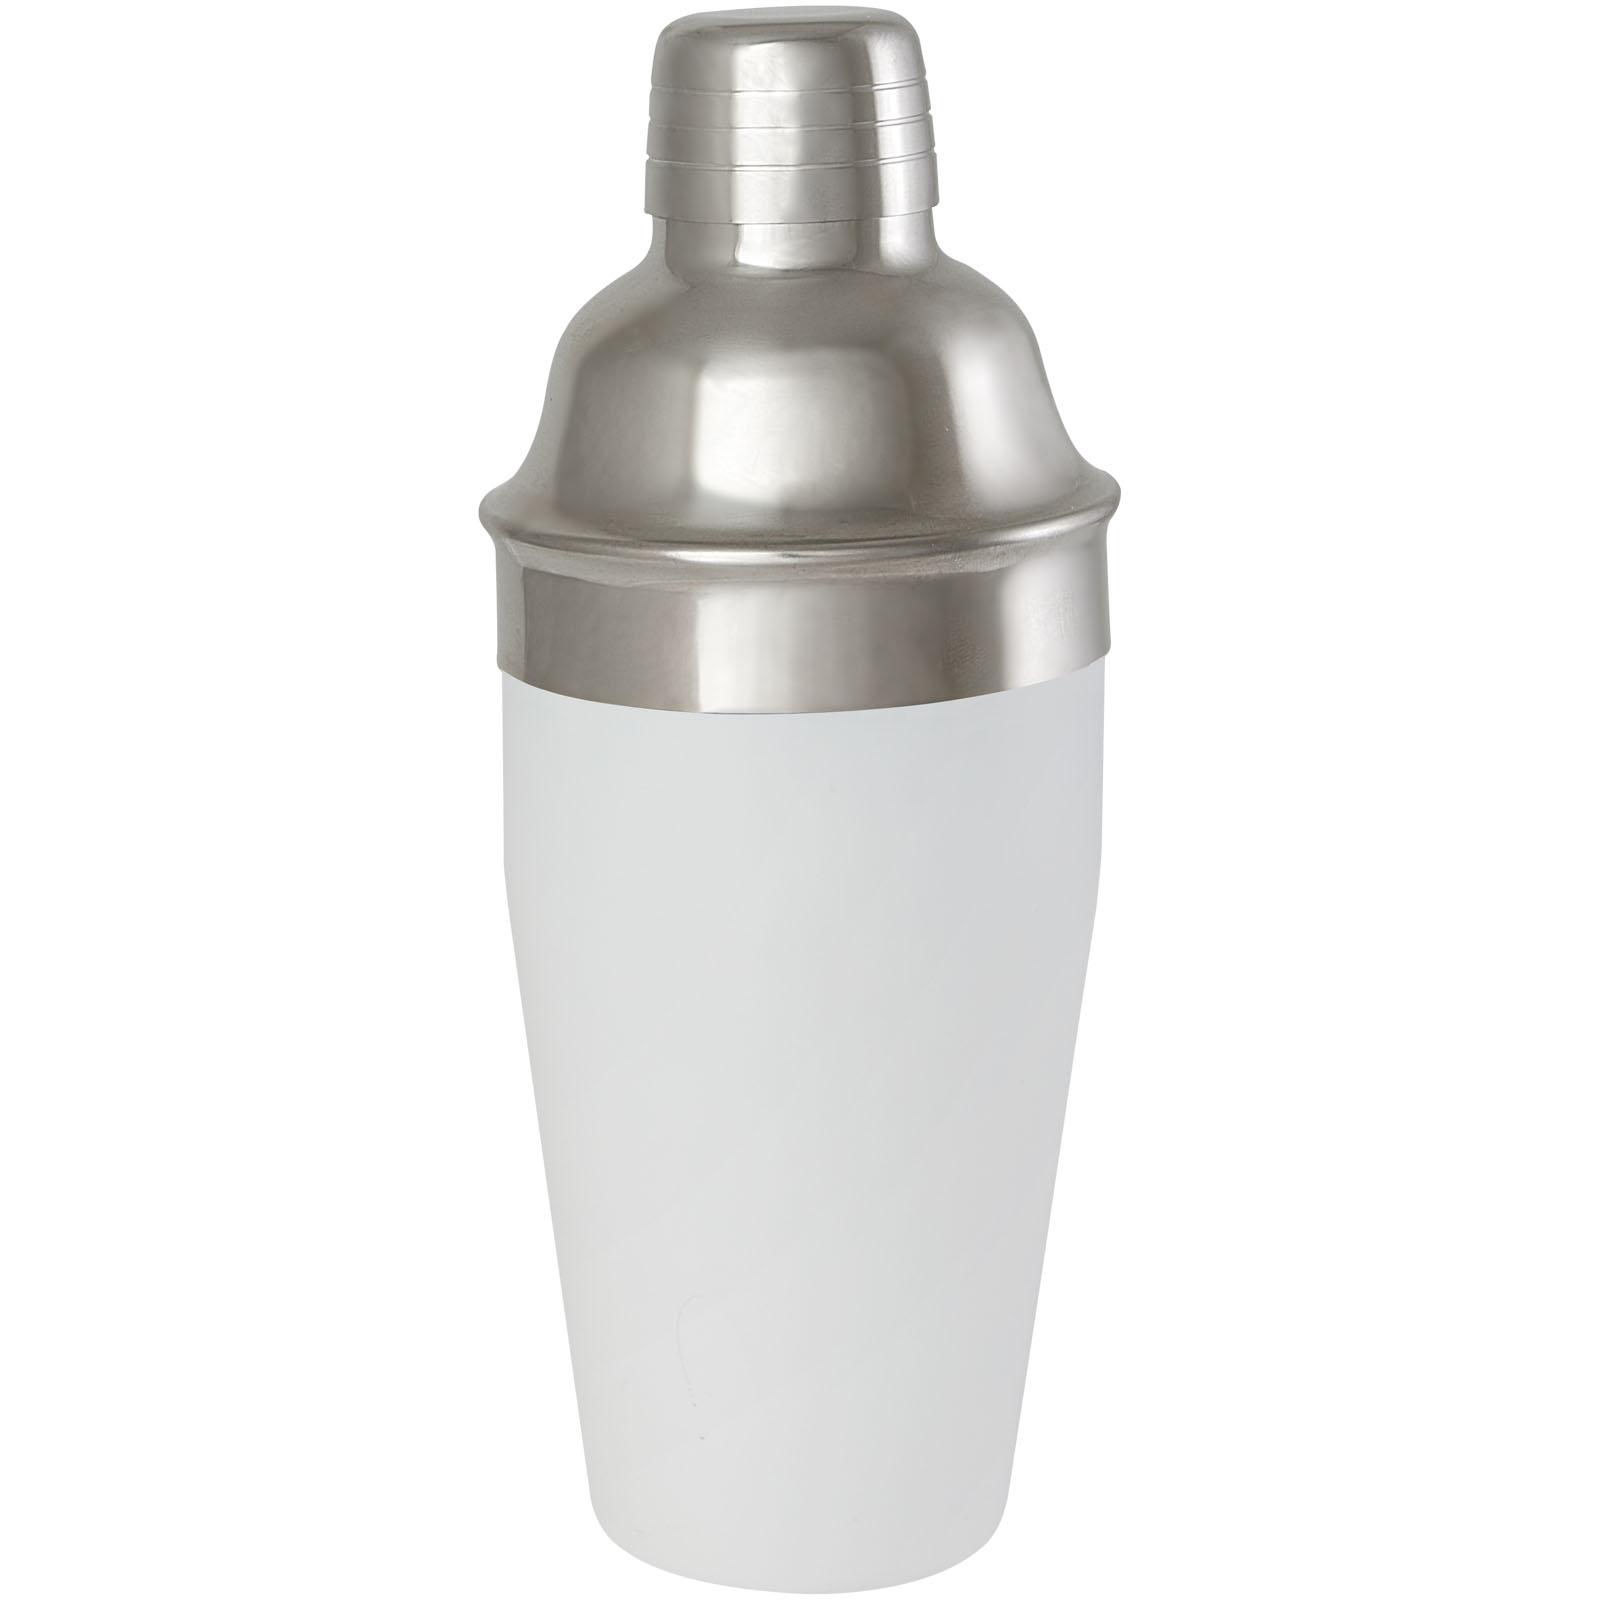 Advertising Home Accessories - Gaudie recycled stainless steel cocktail shaker - 2